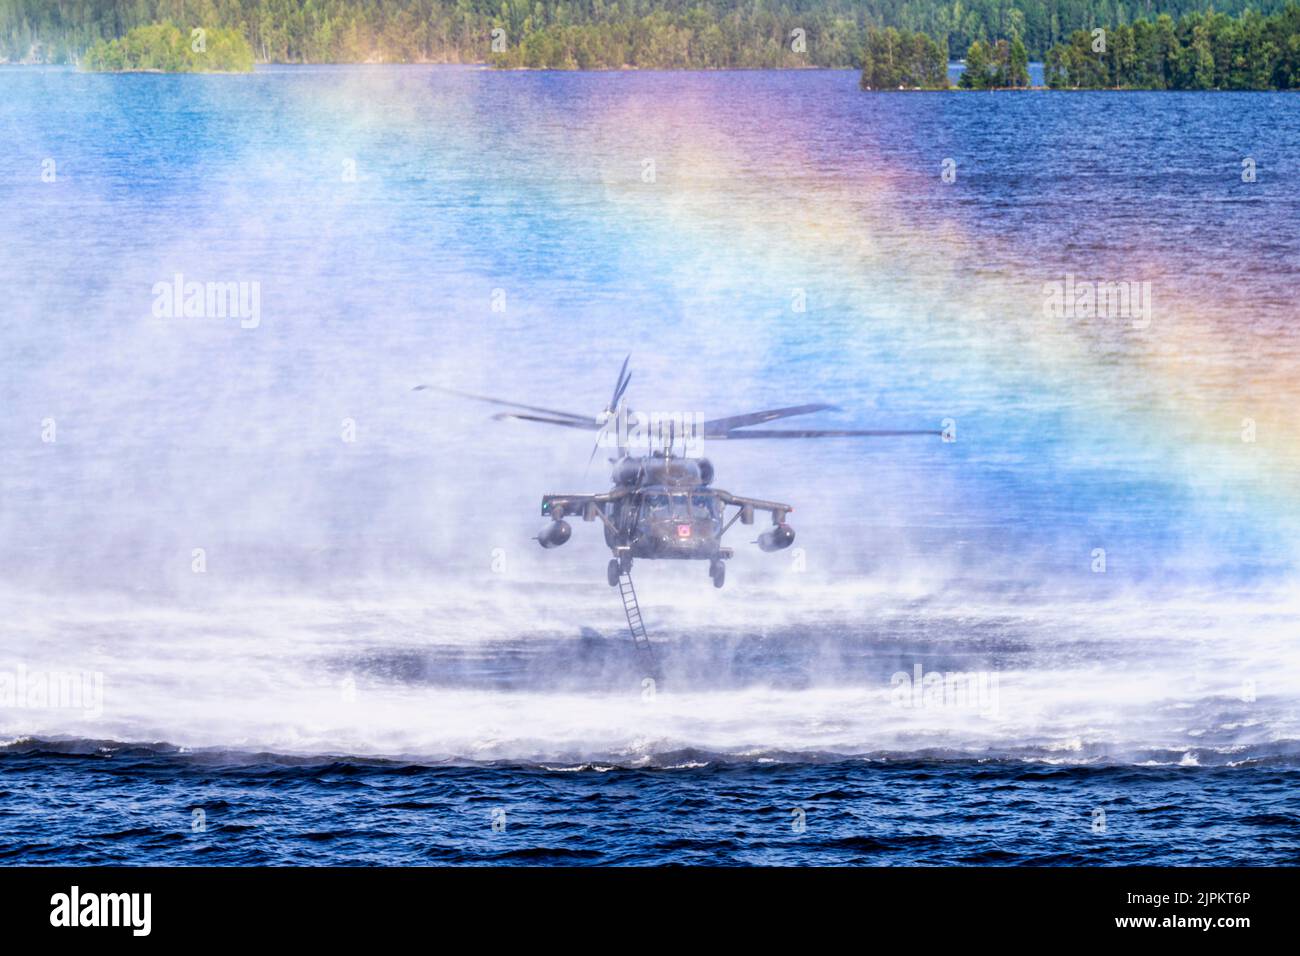 Tampere, Finland. 4th Aug, 2022. A U.S. Army UH-60 Black Hawk helicopter assigned to the 1st Squadron, 214th General Support Aviation Battalion, 12th Combat Aviation Brigade, conducts overwater training at Tampere, Finland, Aug. 4, 2022. 12th Combat Aviation Brigade is one of the units to support U.S. European Command theater strategy by demonstrating U.S. commitment to European Allies and Partners and highlighting U.S. capabilities to diverse audiences. 12 CAB is among other units assigned to V Corps, America's Forward Deployed Corps in Europe. They work alongside NATO Allies and regional Stock Photo